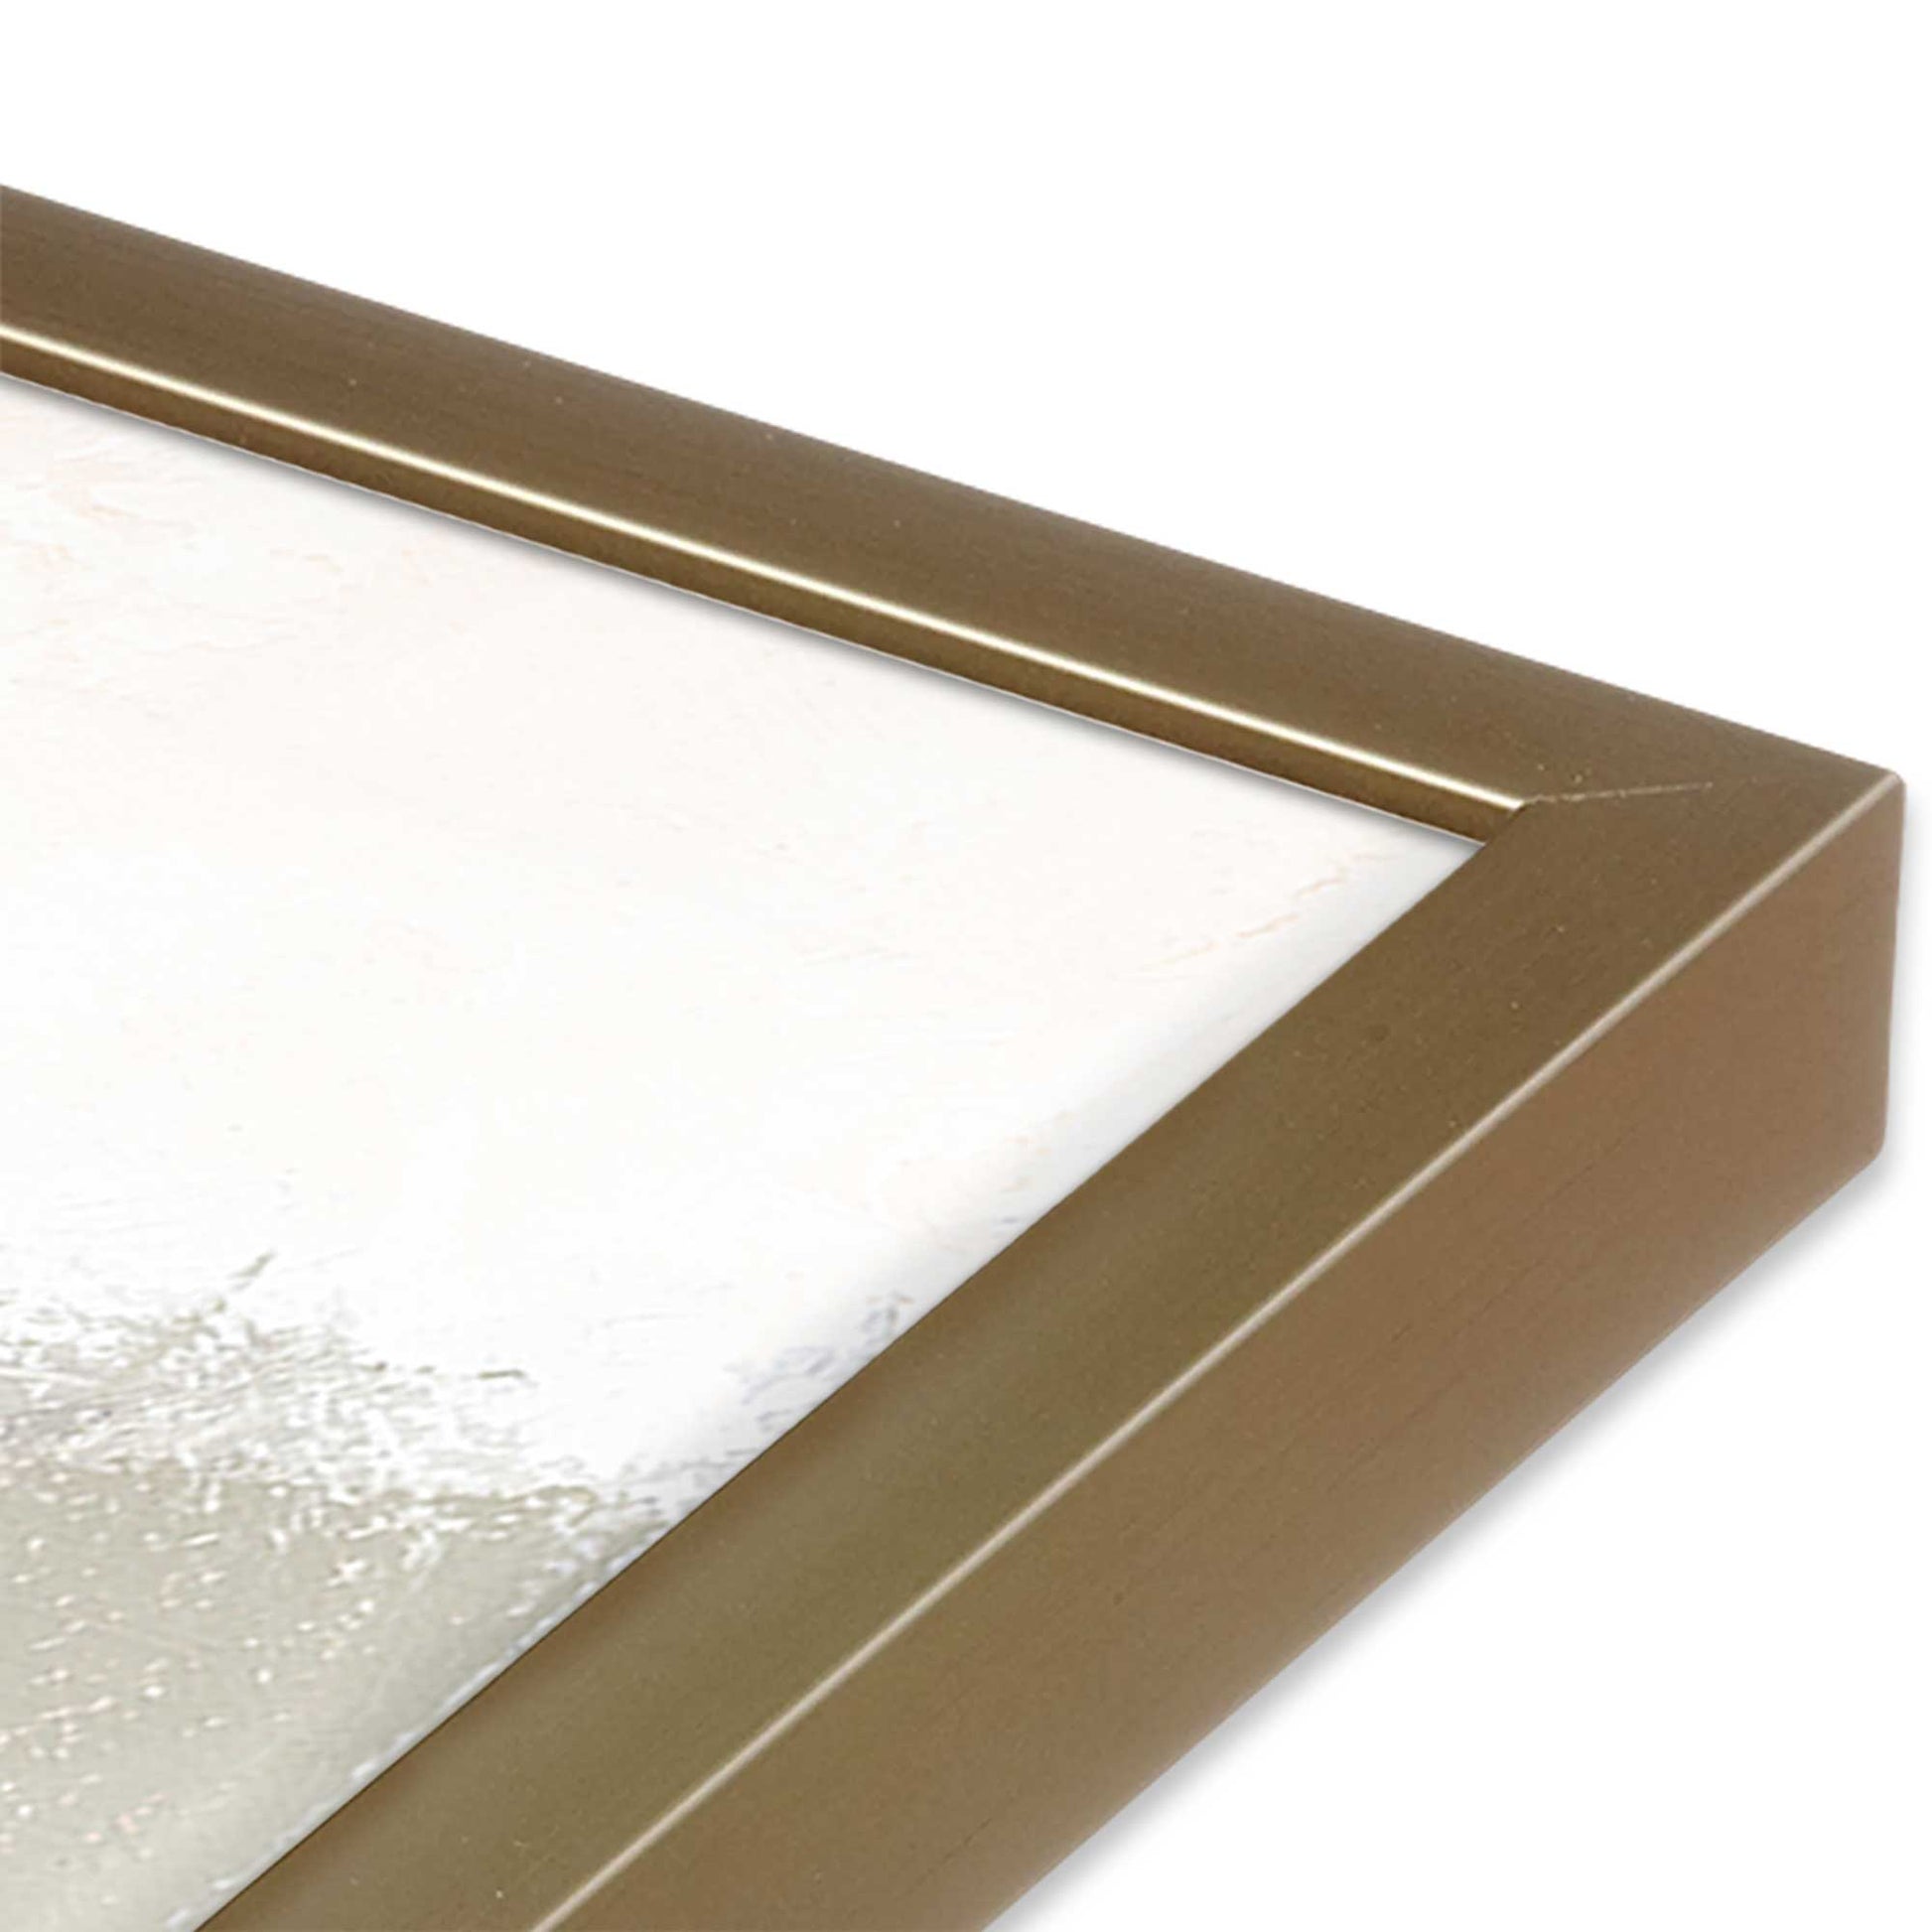 [Color:Brushed Gold], Picture of art in a Brushed Gold frame of the corner